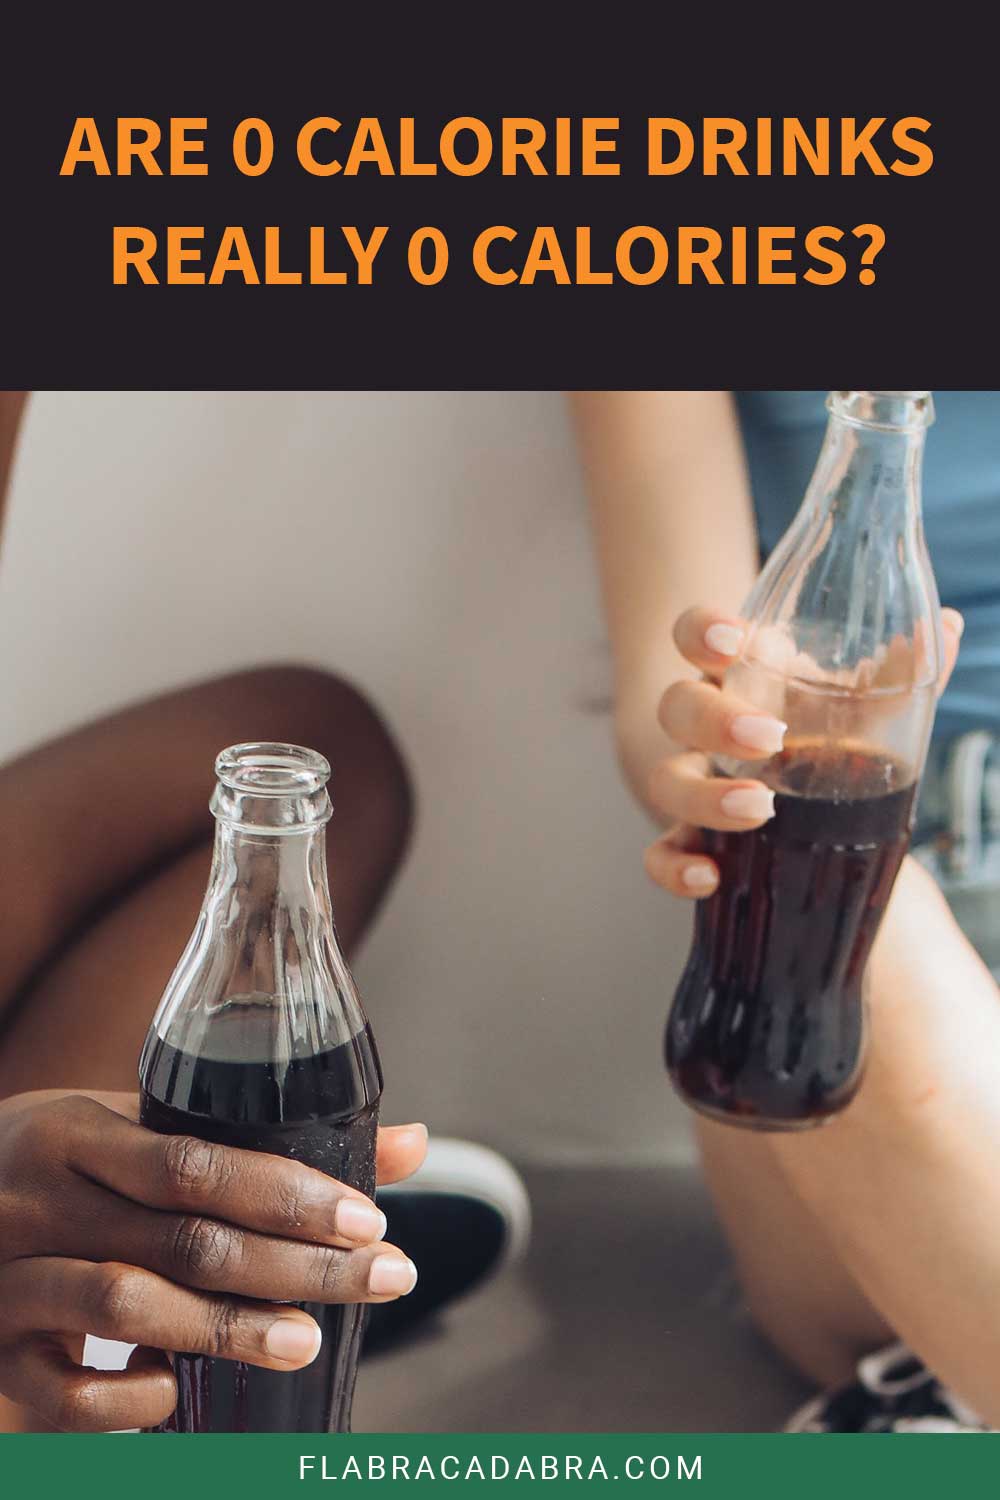 Two Coca cola glass bottles in hands - Are 0 Calorie Drinks Really 0 Calories?